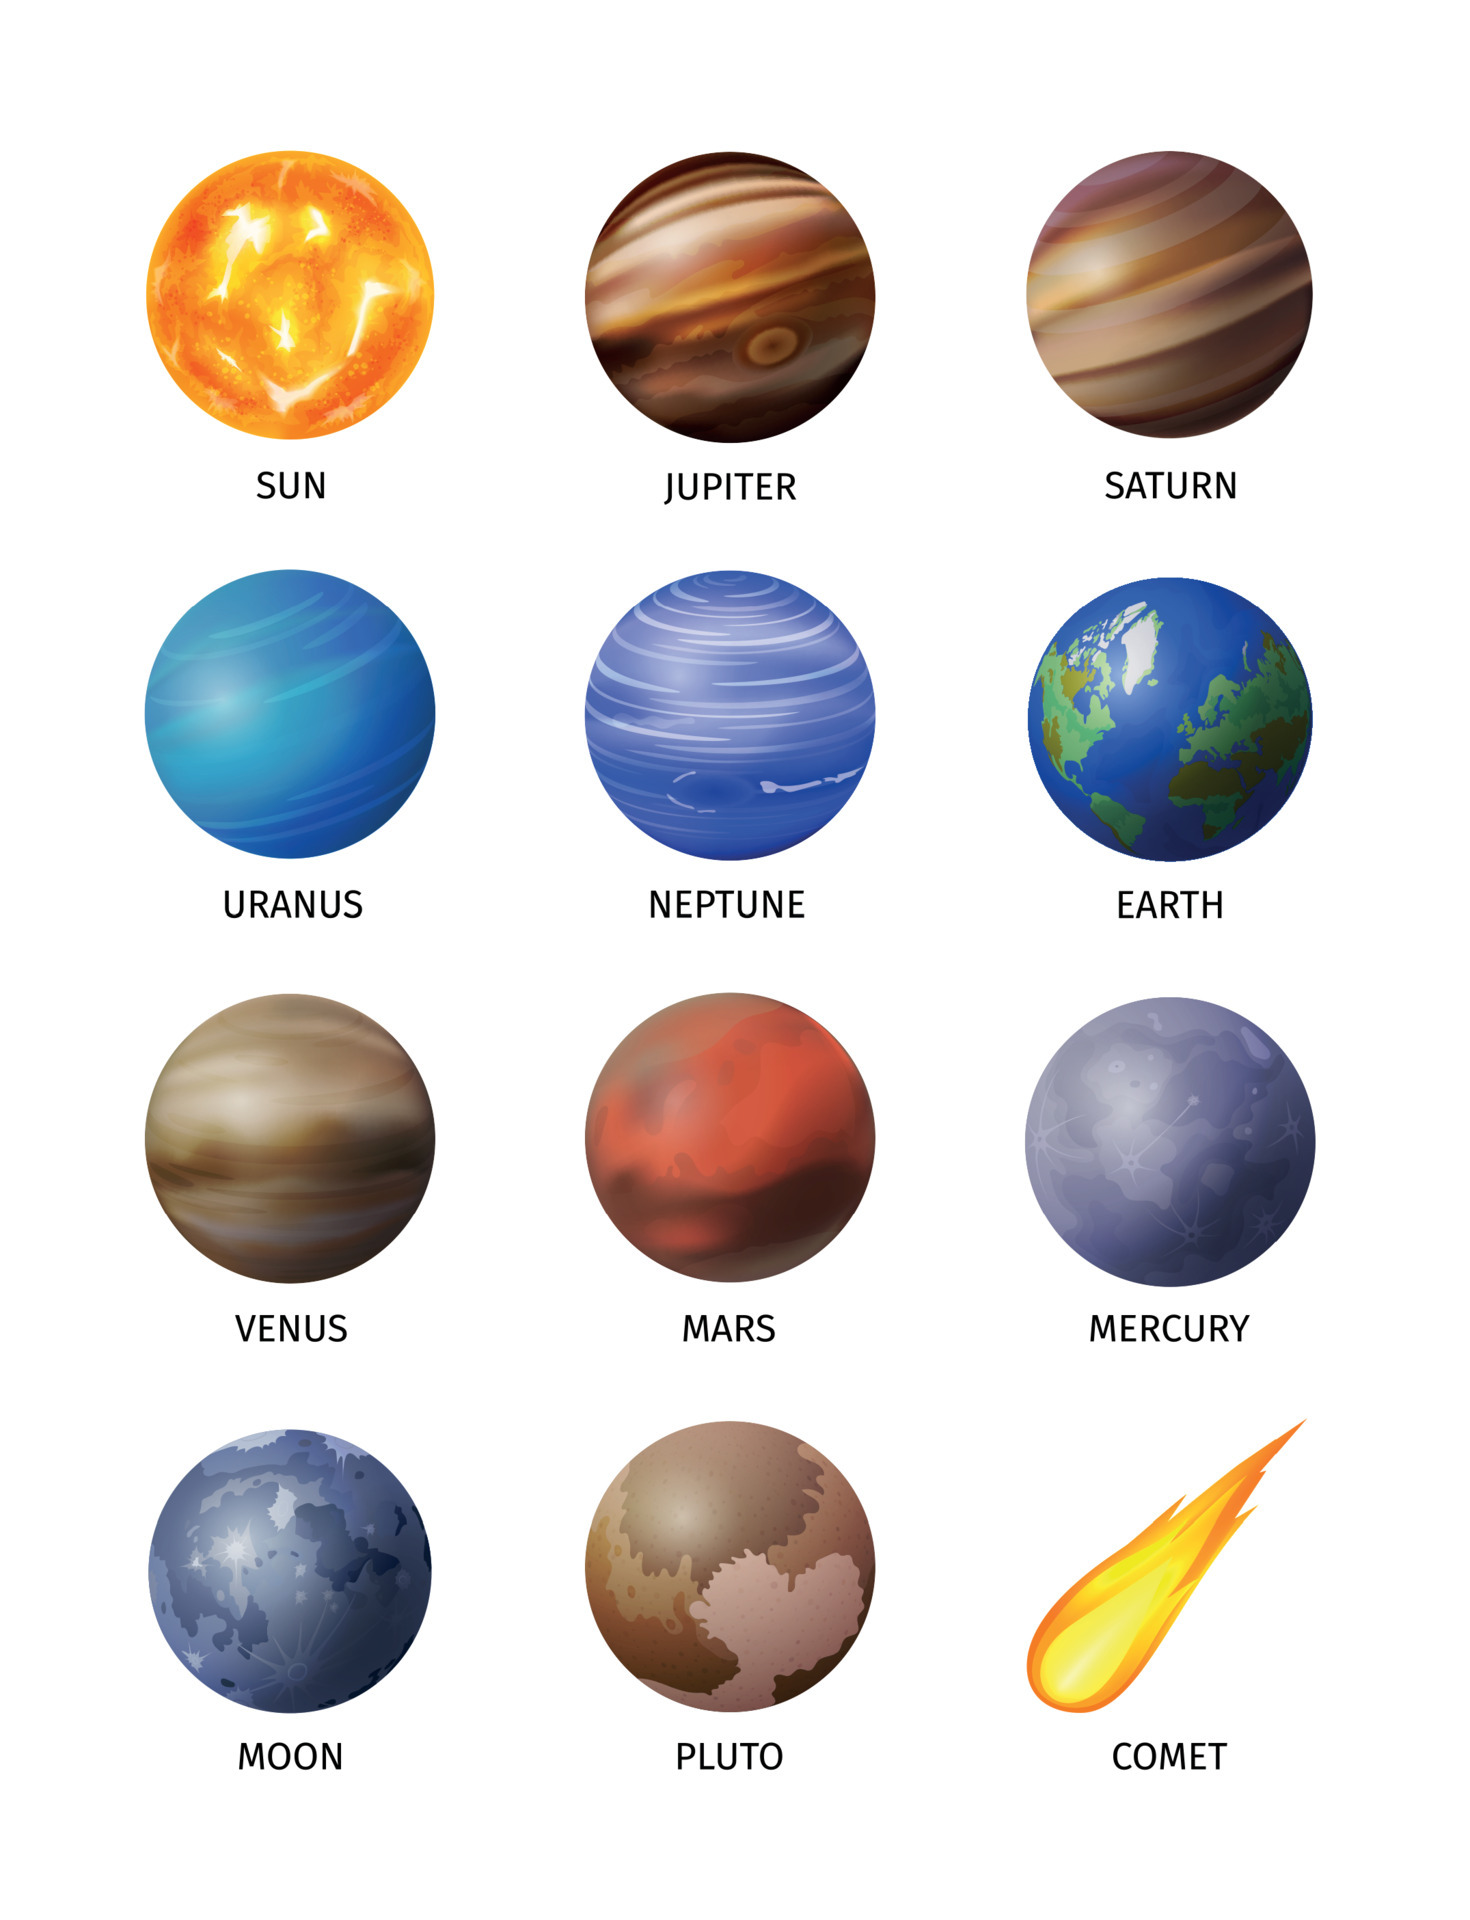 280 Space Drawing Ideas That Are Out of This World - Beautiful Dawn Designs